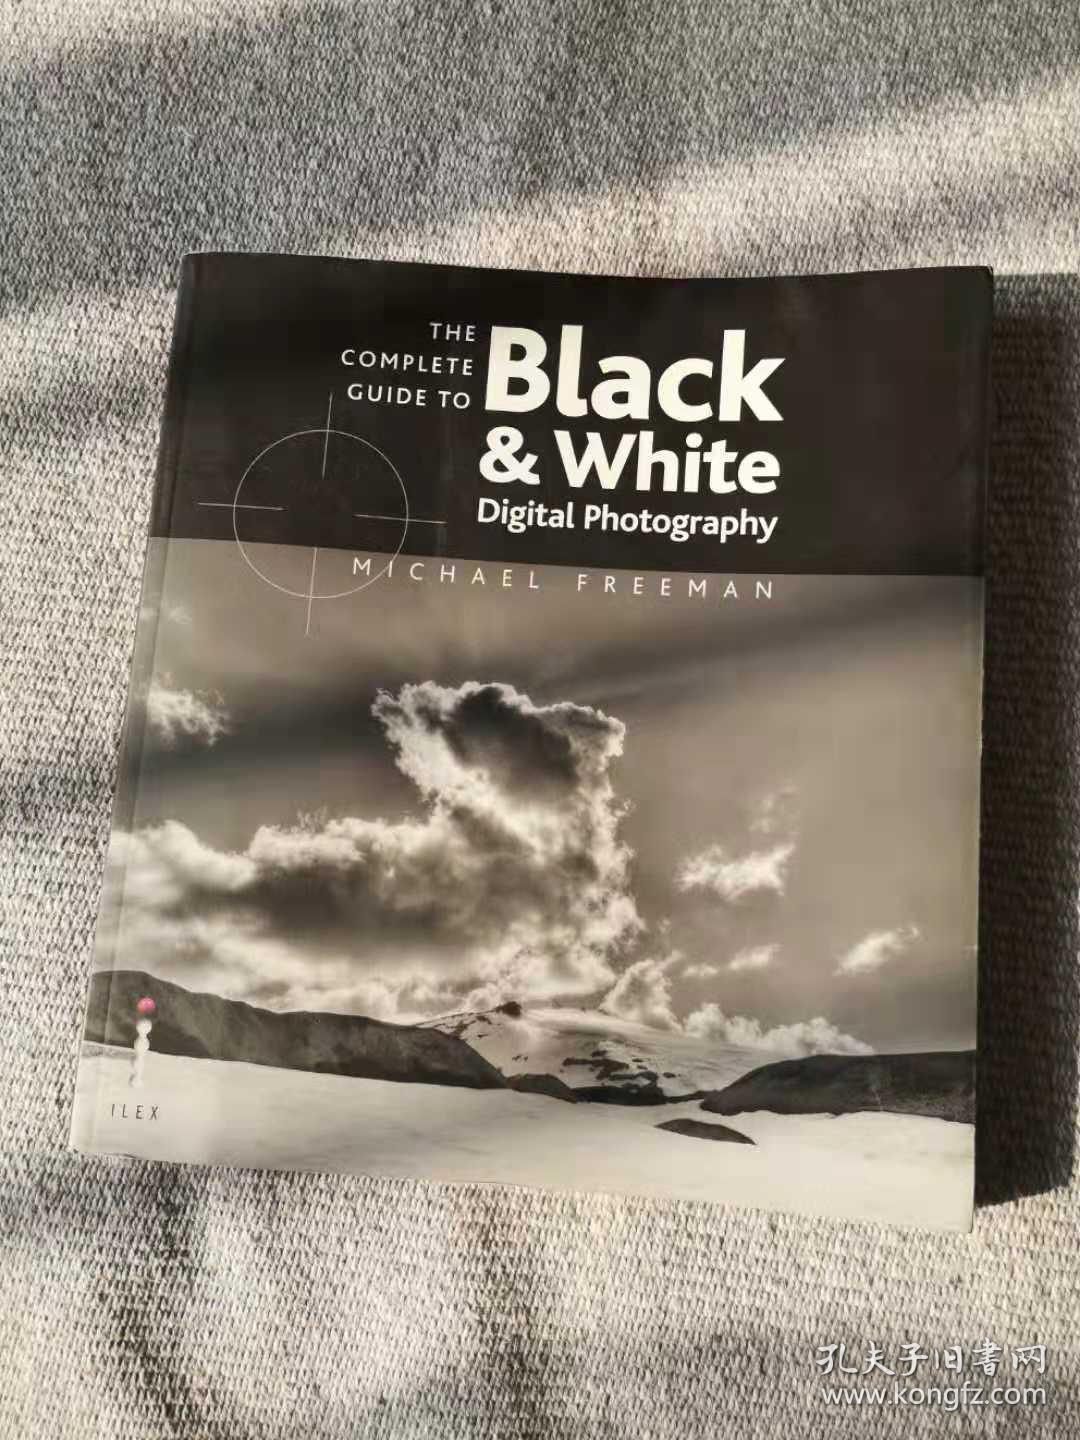 the complete guide to black & white digital photography 英文原版